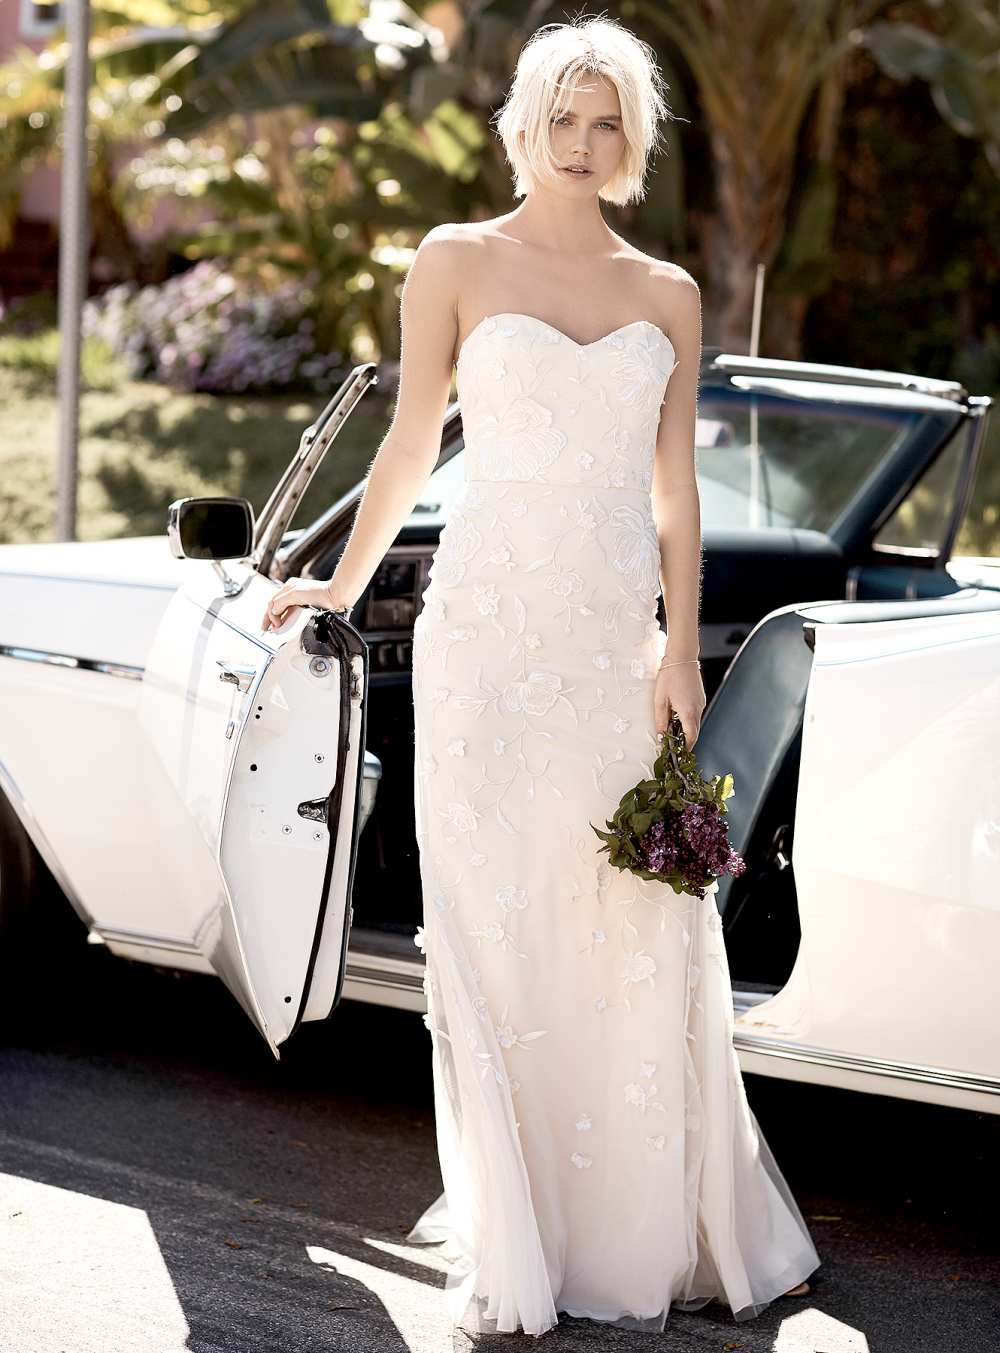 Floravere's R. Gilmore curve-hugging strapless gown.